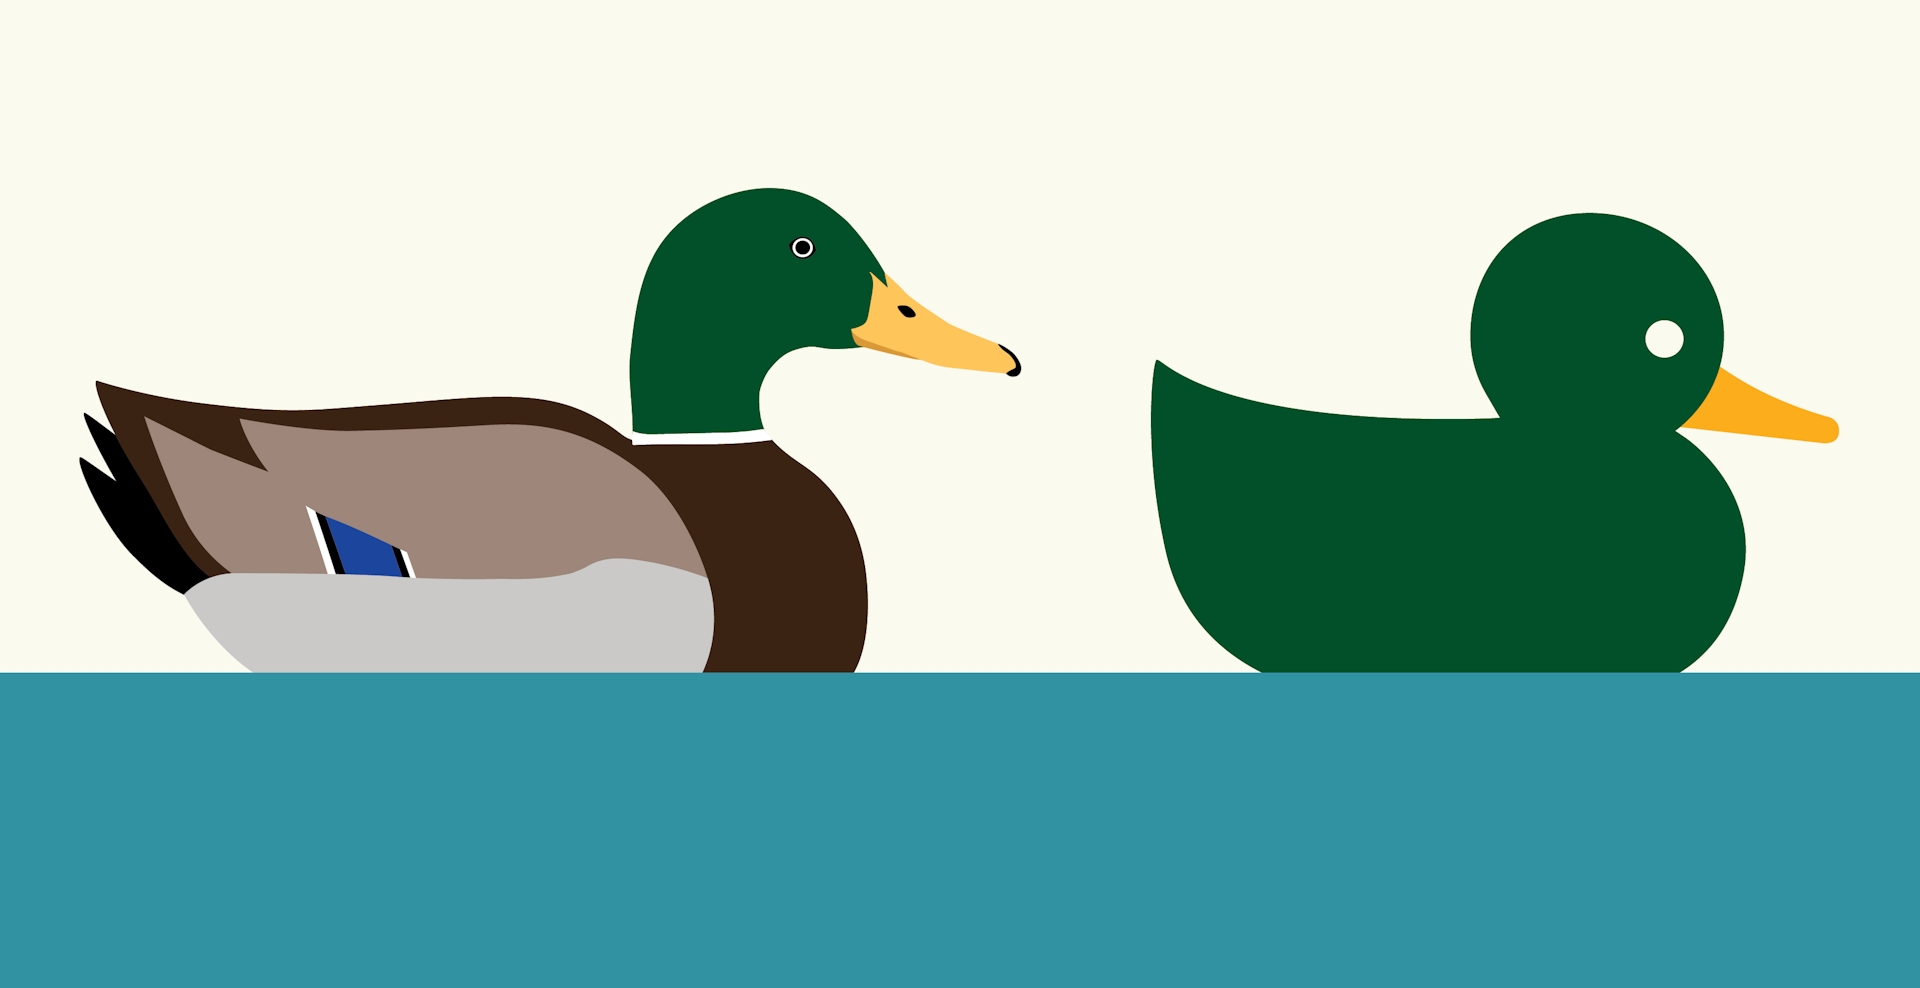 Illustration of a duck and icon of a duck on a blue background